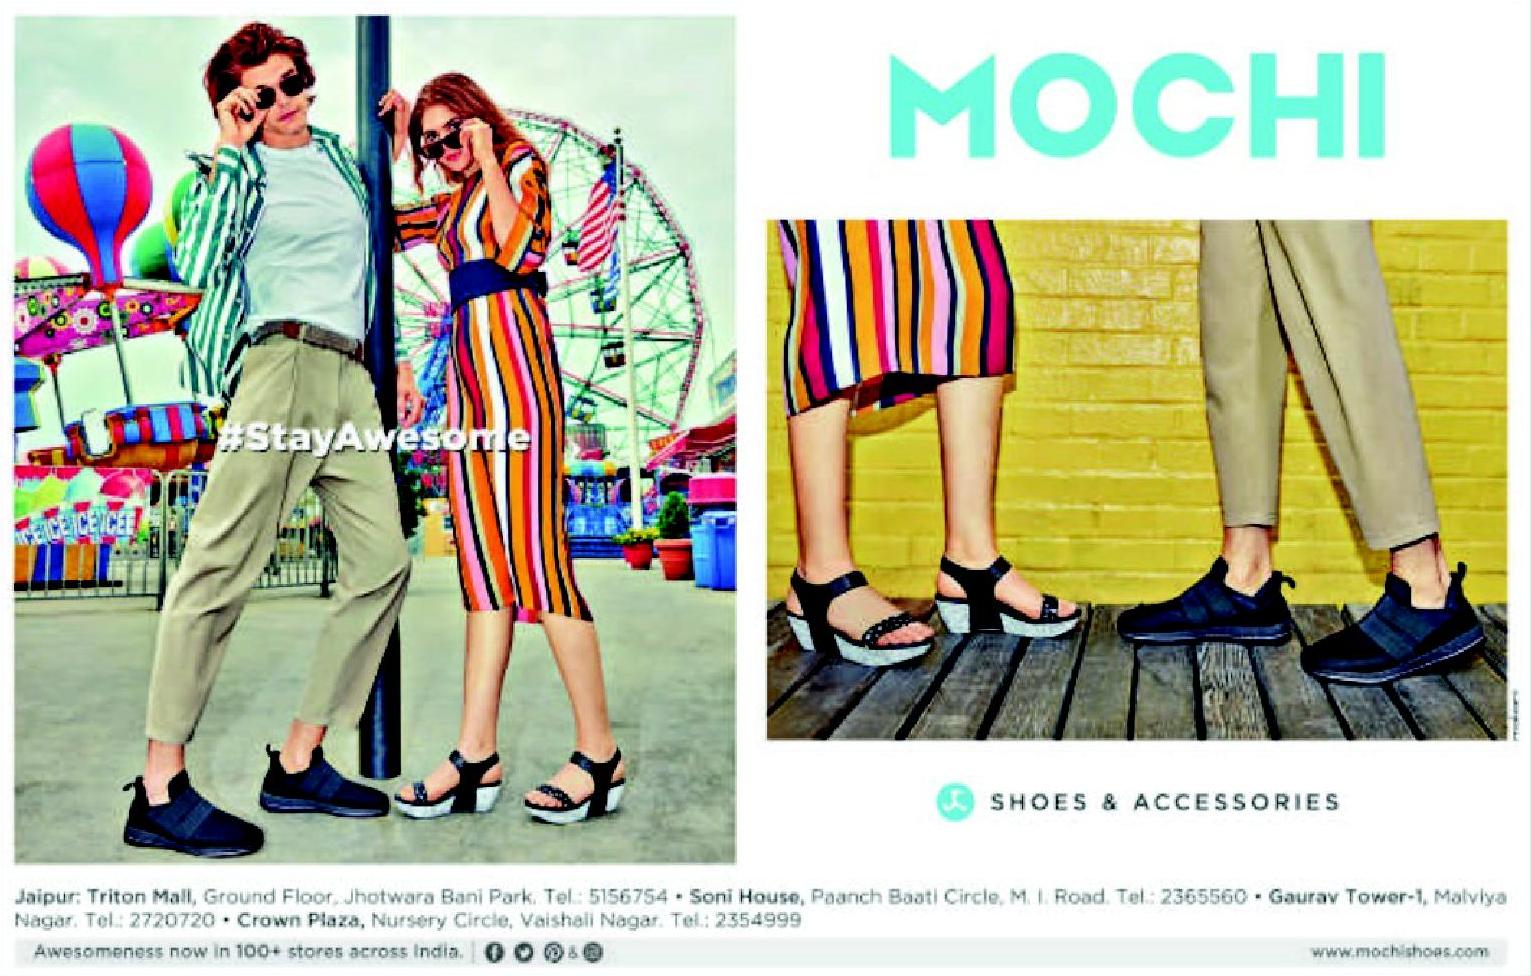 Mochi Stay Awesome Shoes & Accessories in Jaipur Ad - Advert Gallery